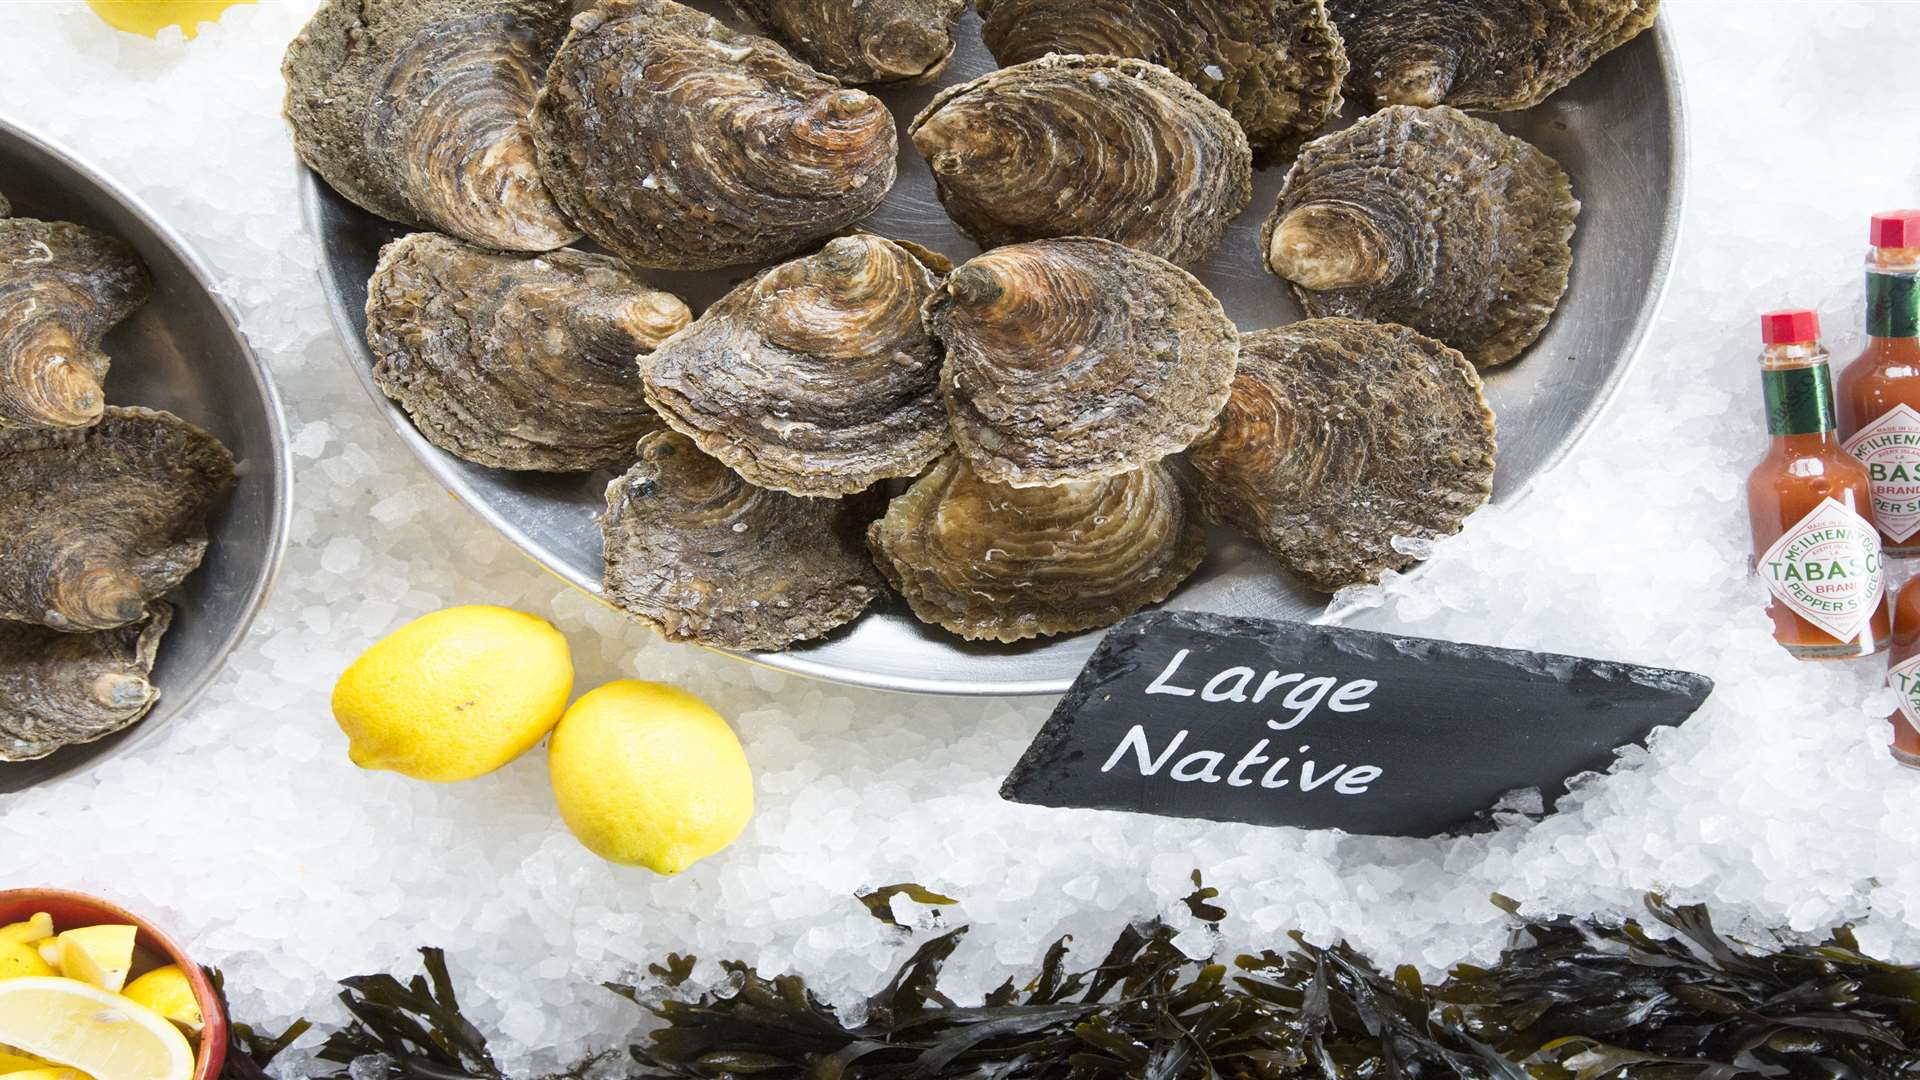 Oysters are making a strong revival